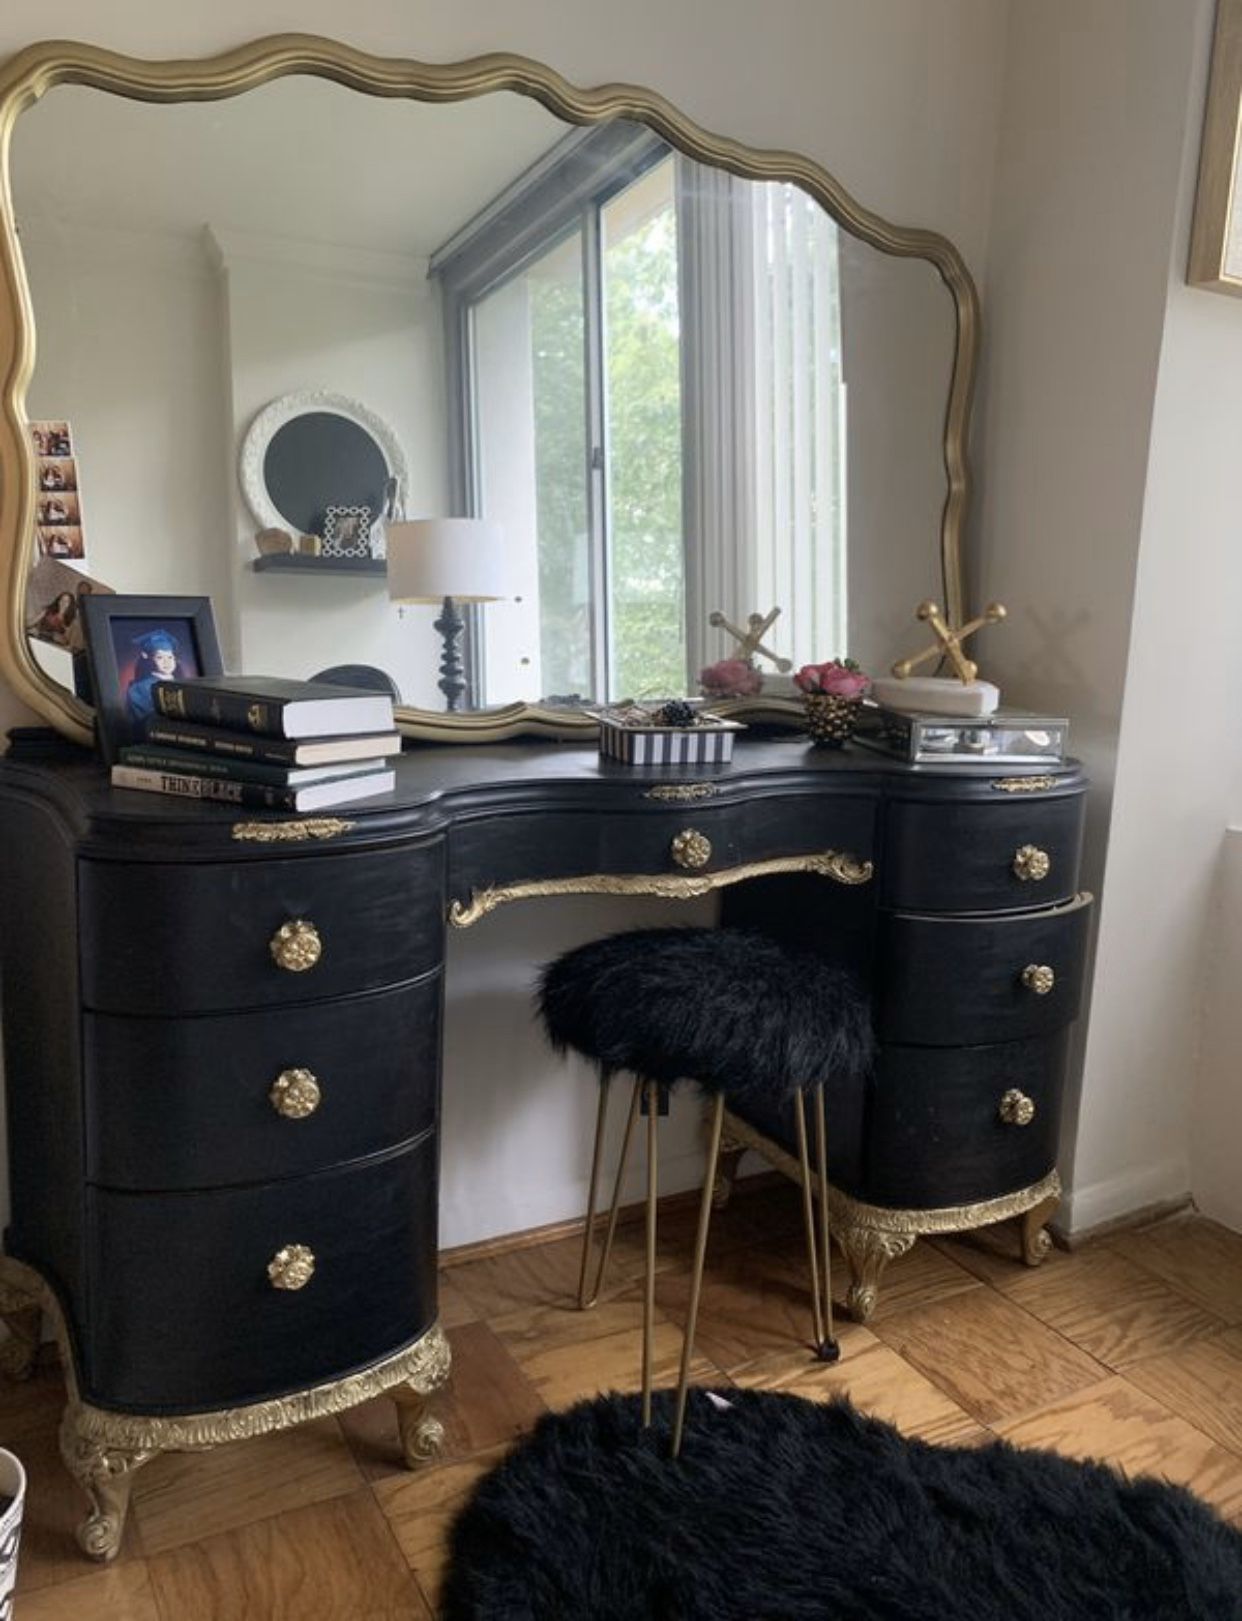 Vanity & mirror with matching stool